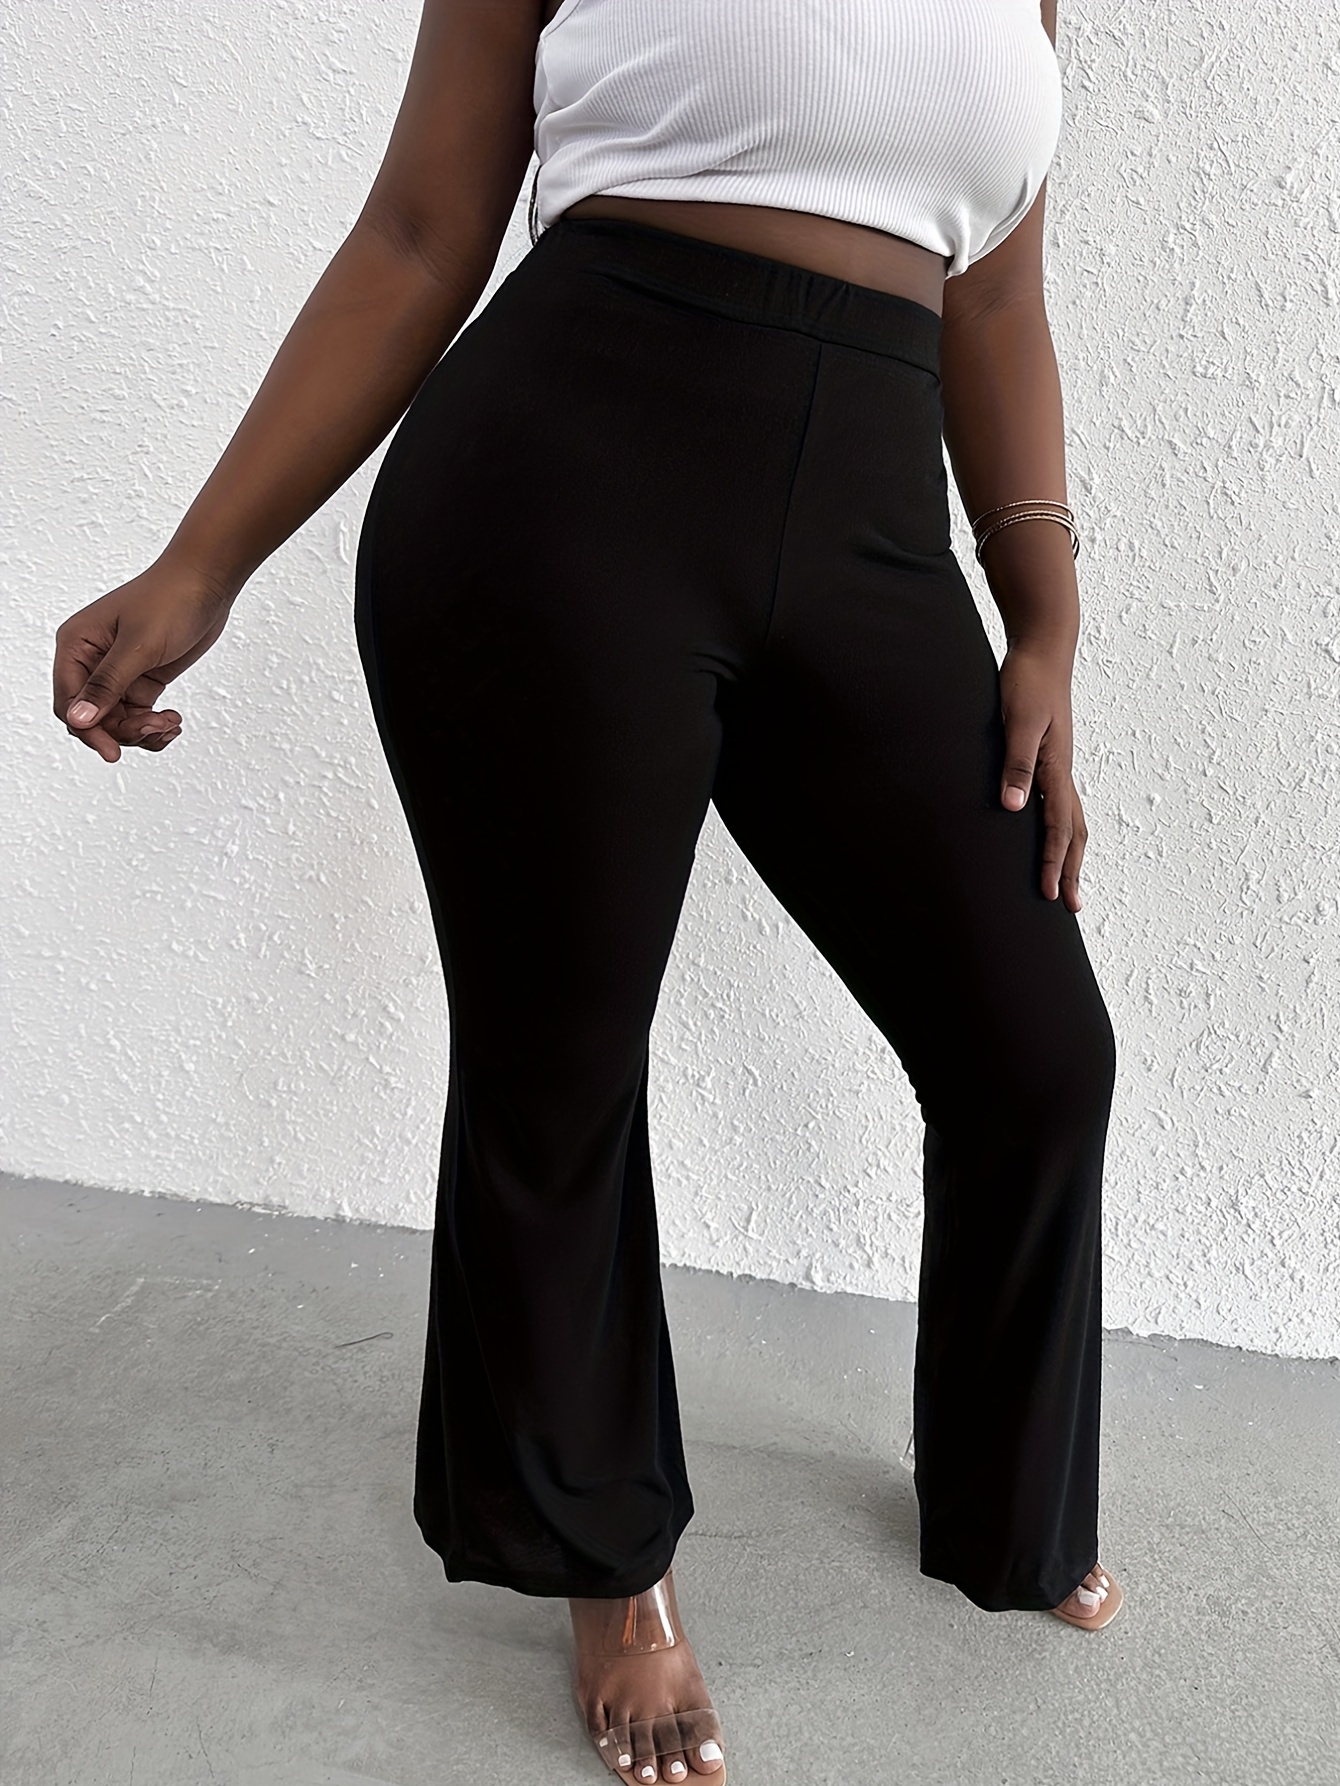 Plus Size High * Flared Pants, Women's Plus Casual Medium Stretch Bell  Bottom Pants